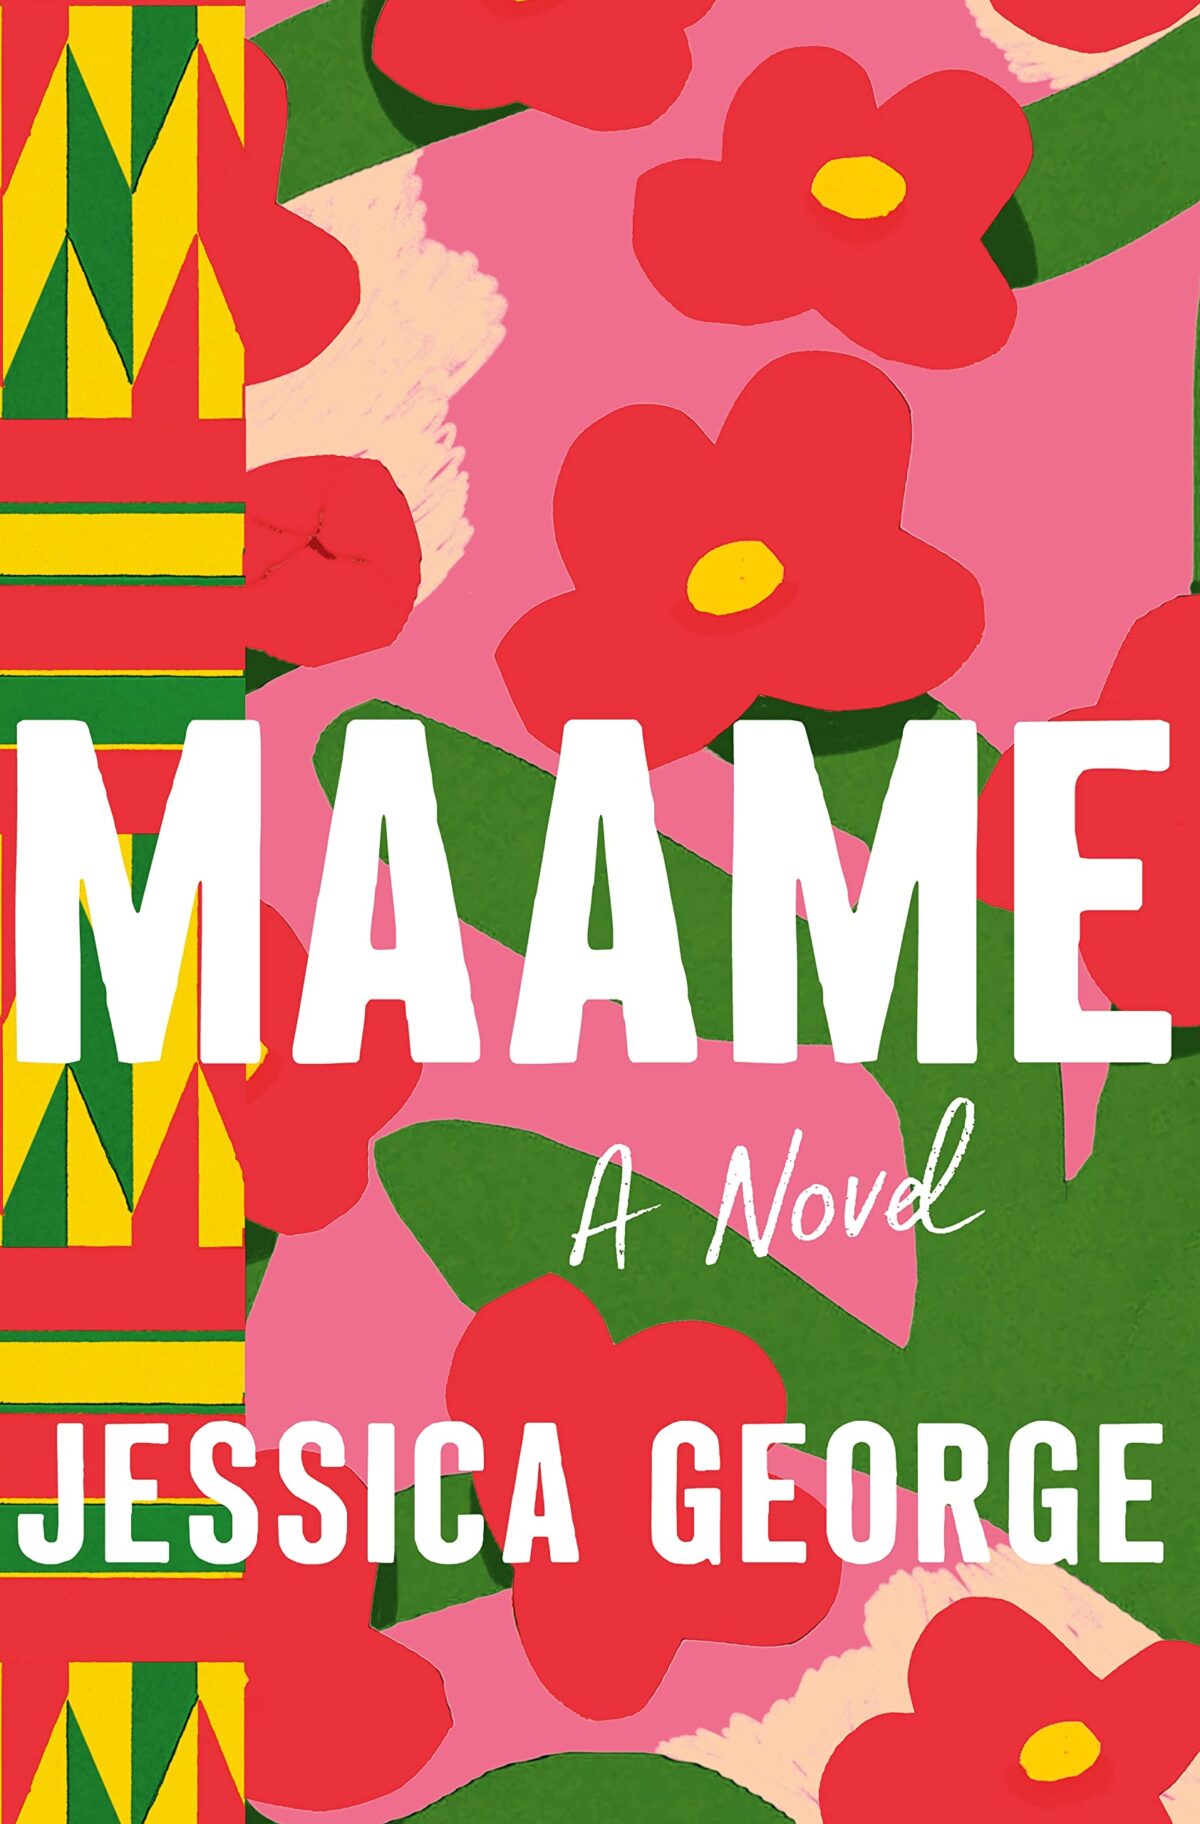 maame book review guardian